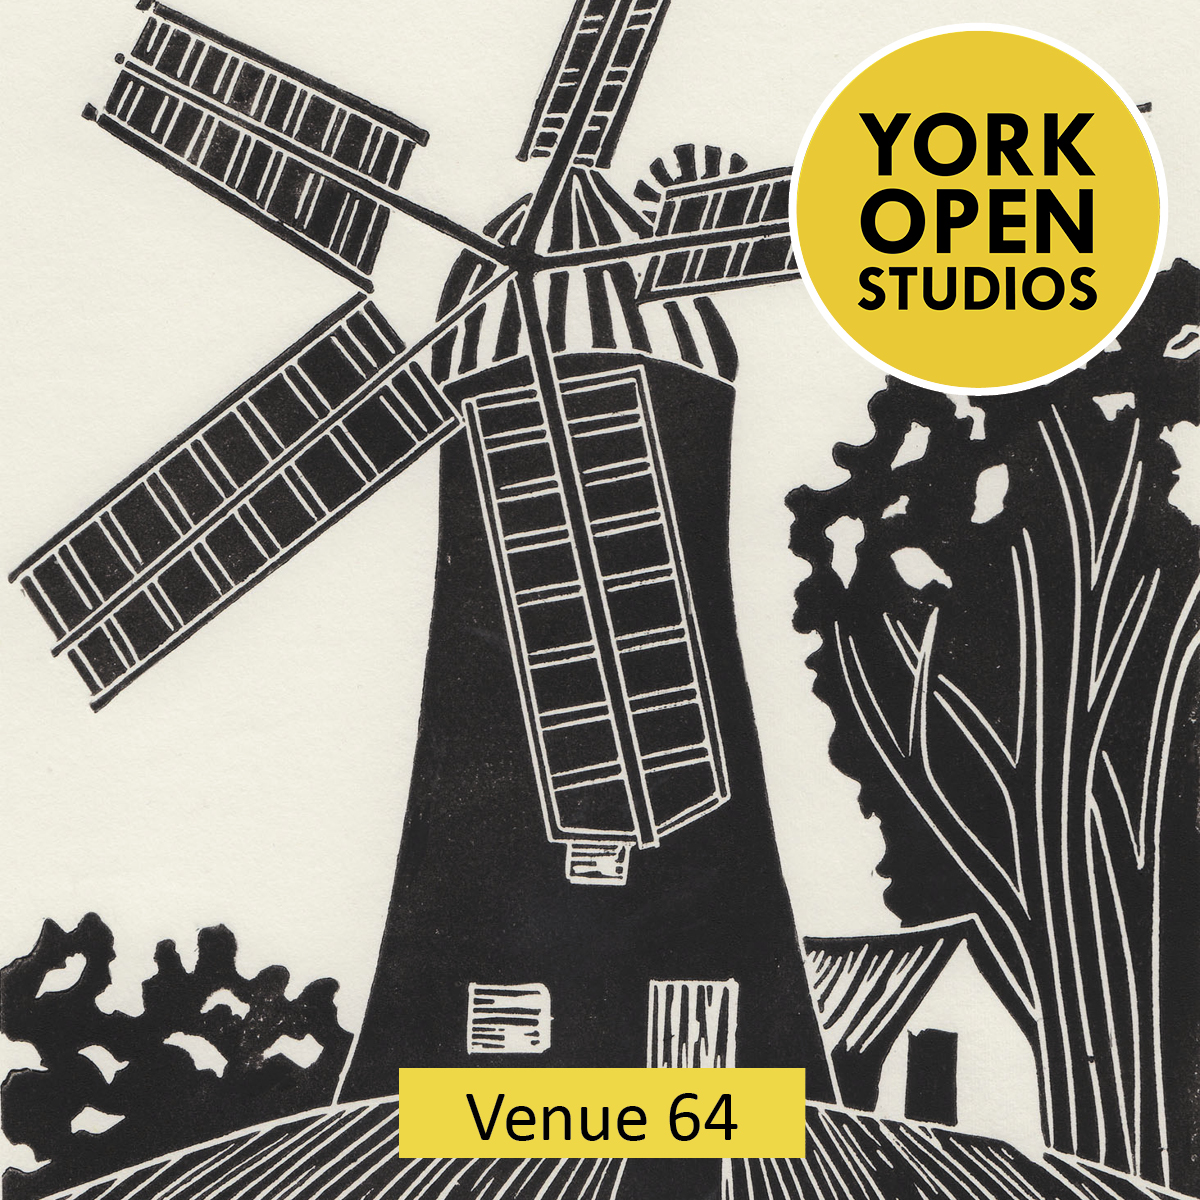 20 & 21 April, 10am to 5pm @YorkOpenStudios I'm around the corner from @HolgateWindmill. Need a coffee? @BluebirdBakery is open on Sat 8am - 4pm & Sun 10am - 3pm. Their chocolate brownies are heaven! #linocut #printmaking #LandscapeArt #YorkshireArtitst #York #ArtExhibition